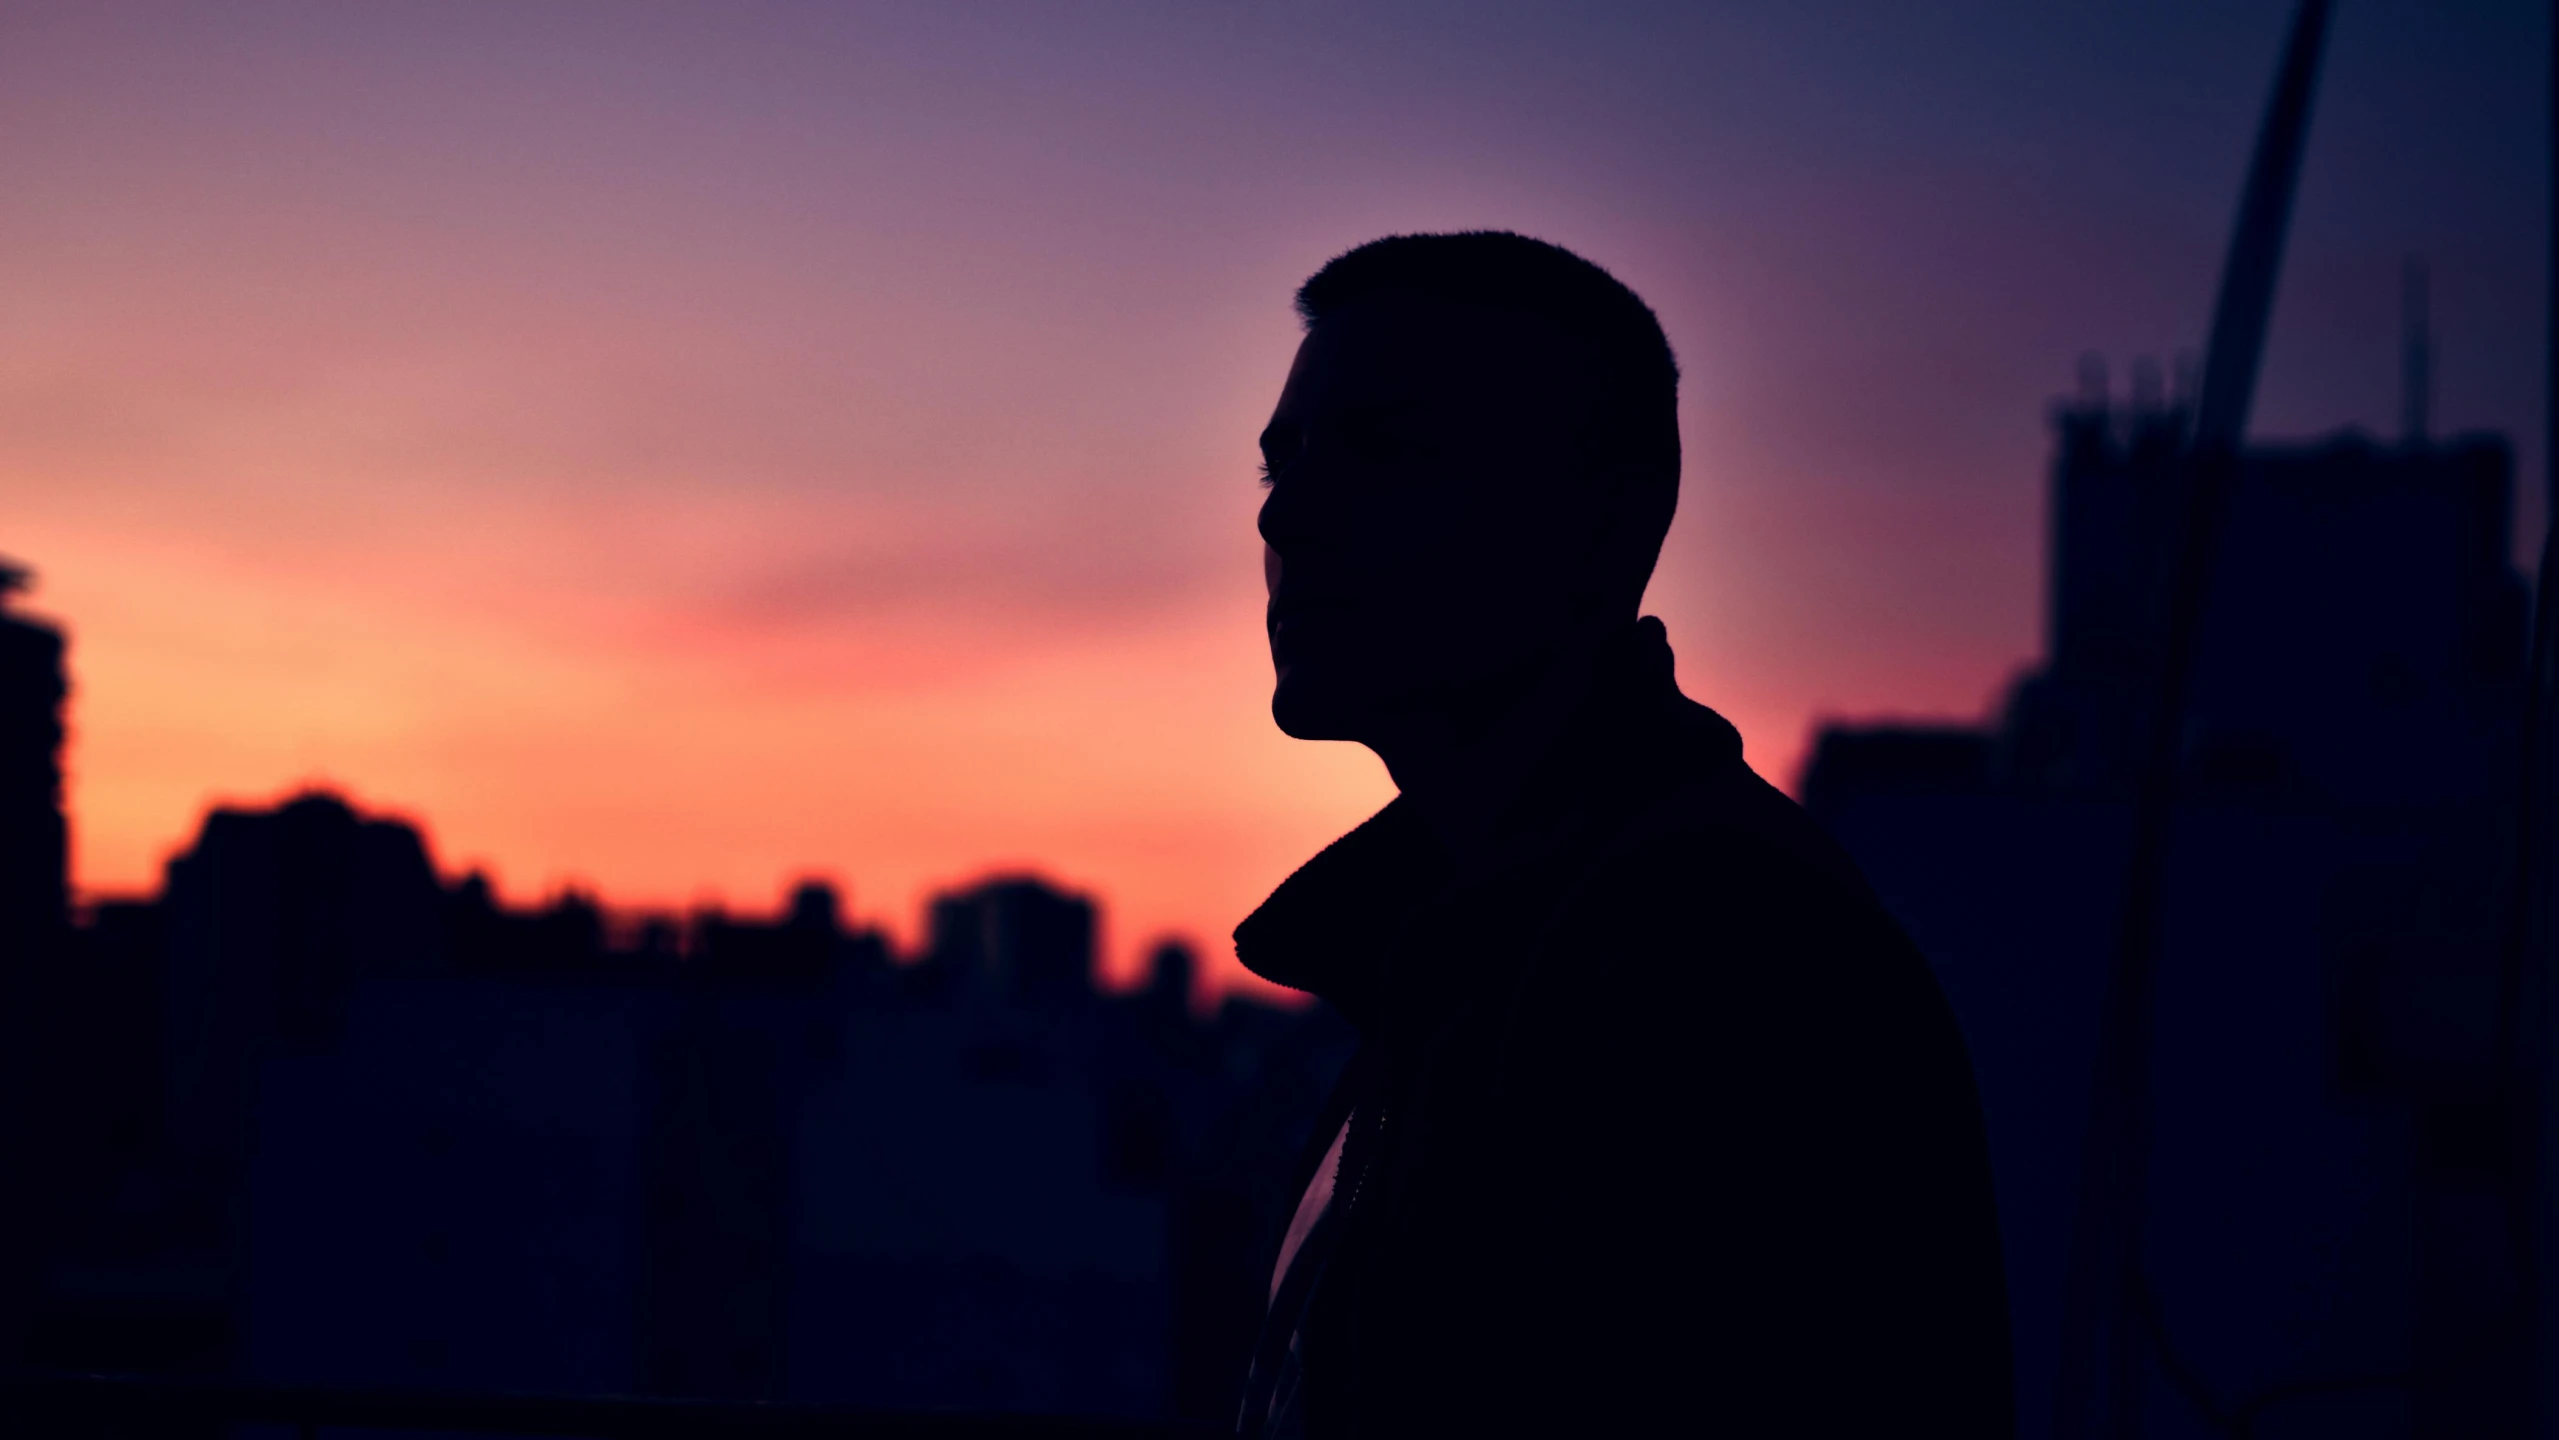 a silhouette of a man standing in front of a sunset, pexels contest winner, side profile cenetered portrait, city views, ad image, color photograph